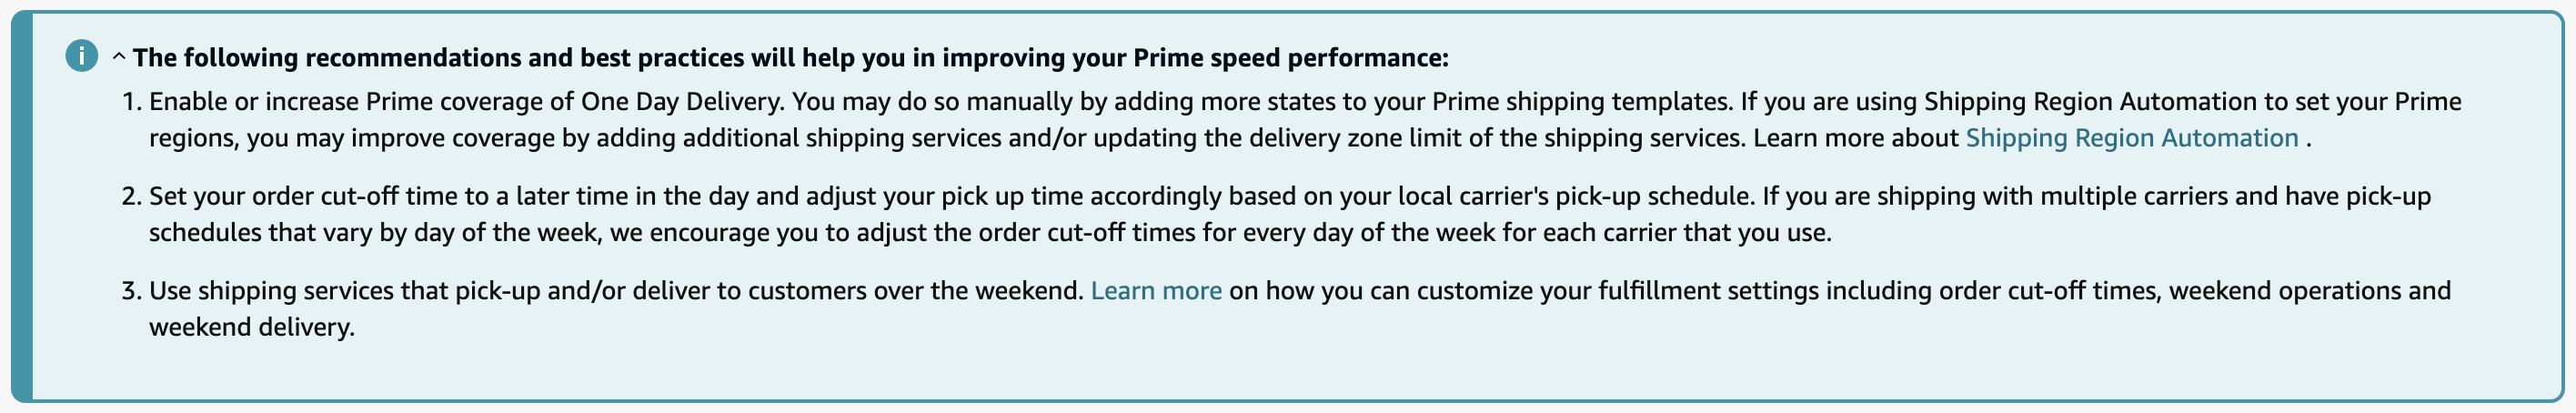 Screenshot from an Amazon account listing different recommendations and best practices to help improve the seller's Prime speed performance.